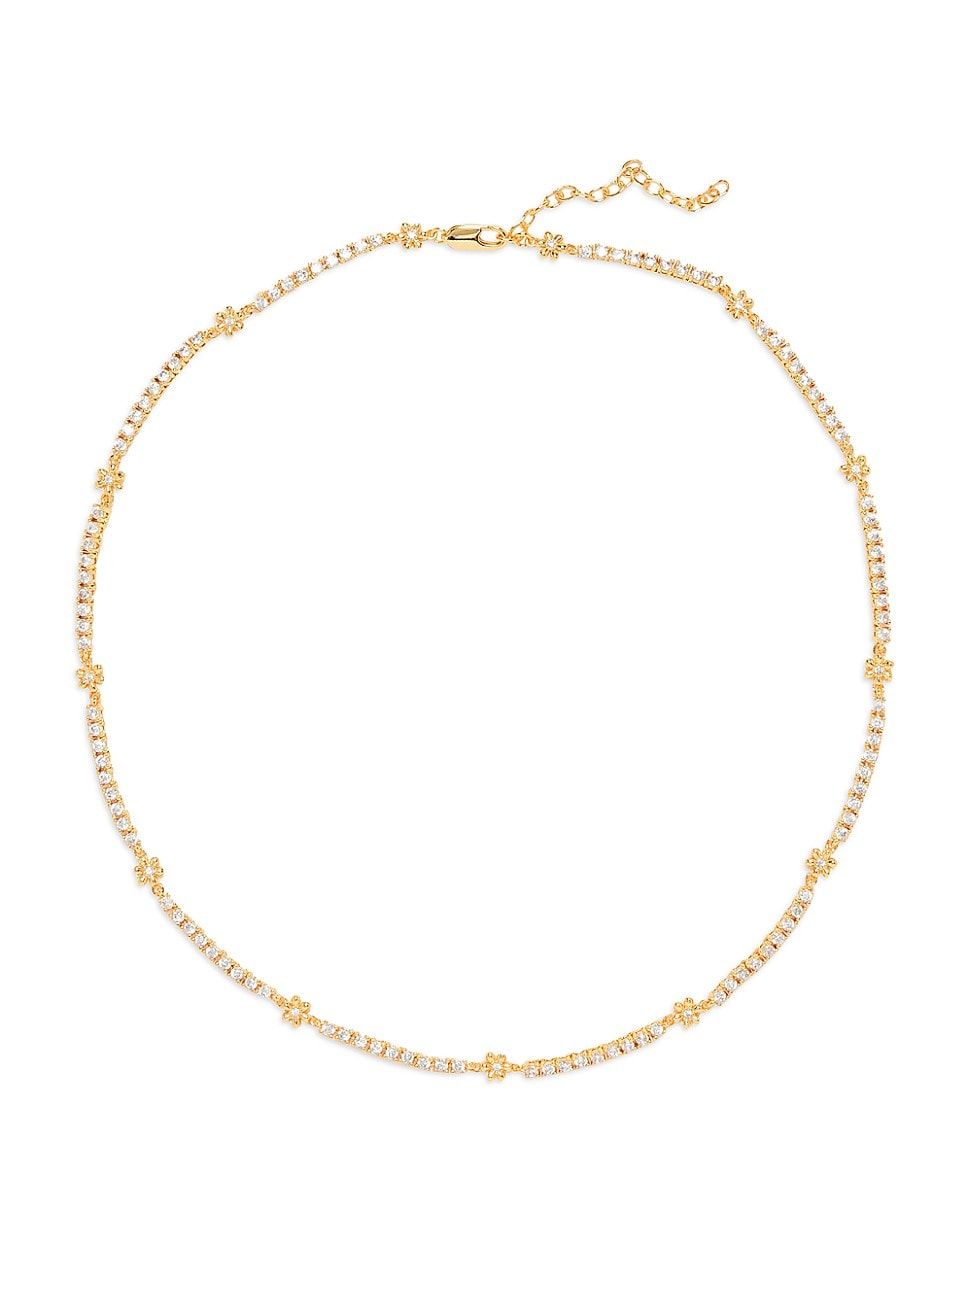 Women's Daisy 14K Gold-Plate & Cubic Zirconia Baller Chain Necklace - Gold | Saks Fifth Avenue